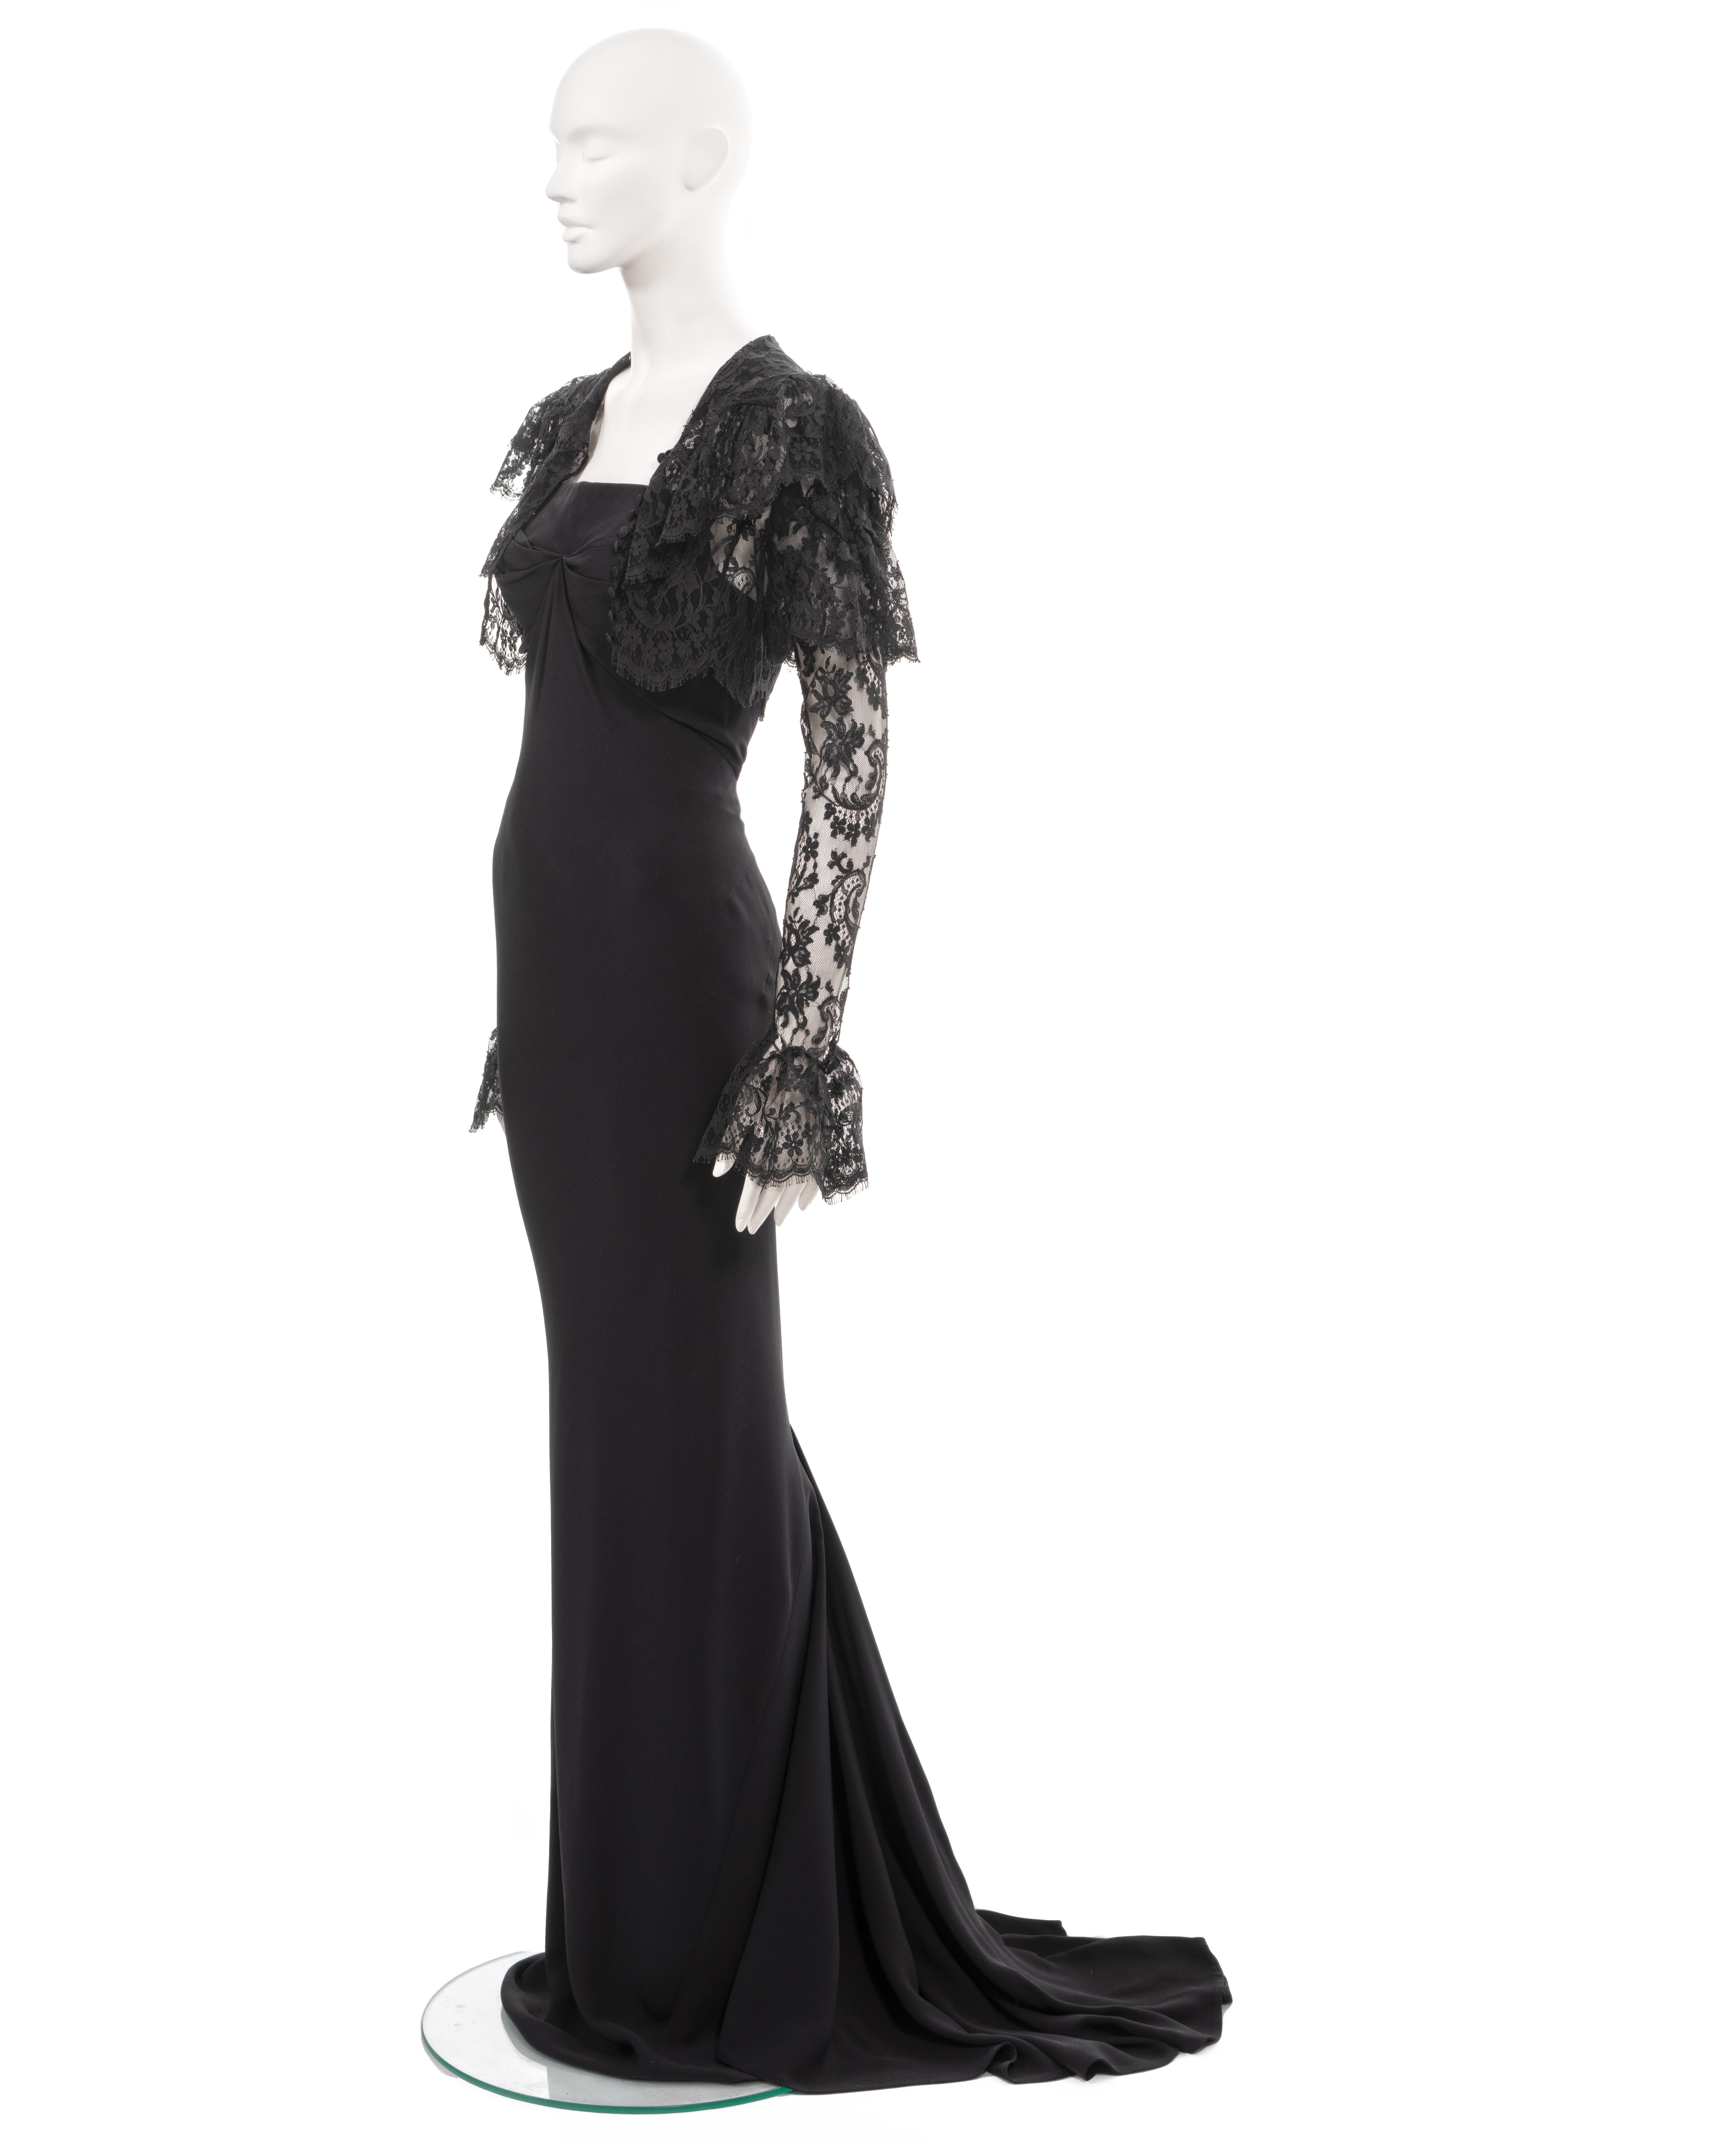 Givenchy by John Galliano black strapless evening dress and lace bolero, ss 1997 For Sale 7